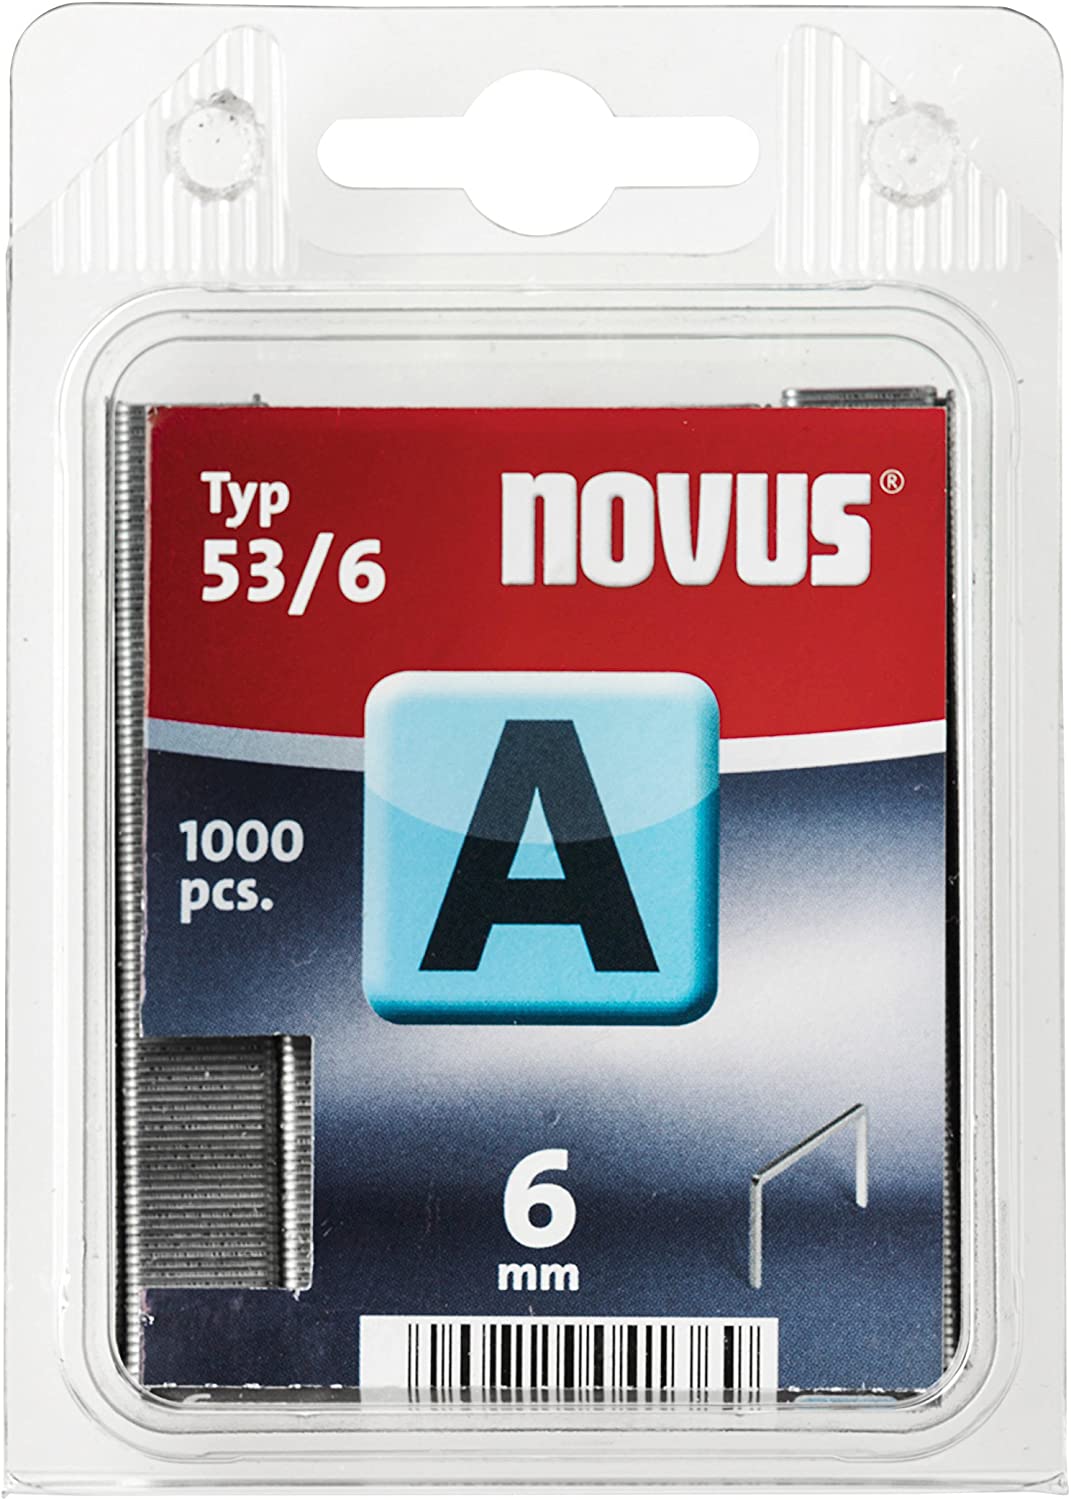 Novus - Typ 53/6 A-6 mm Staples (Pack of 1000) /Stationery